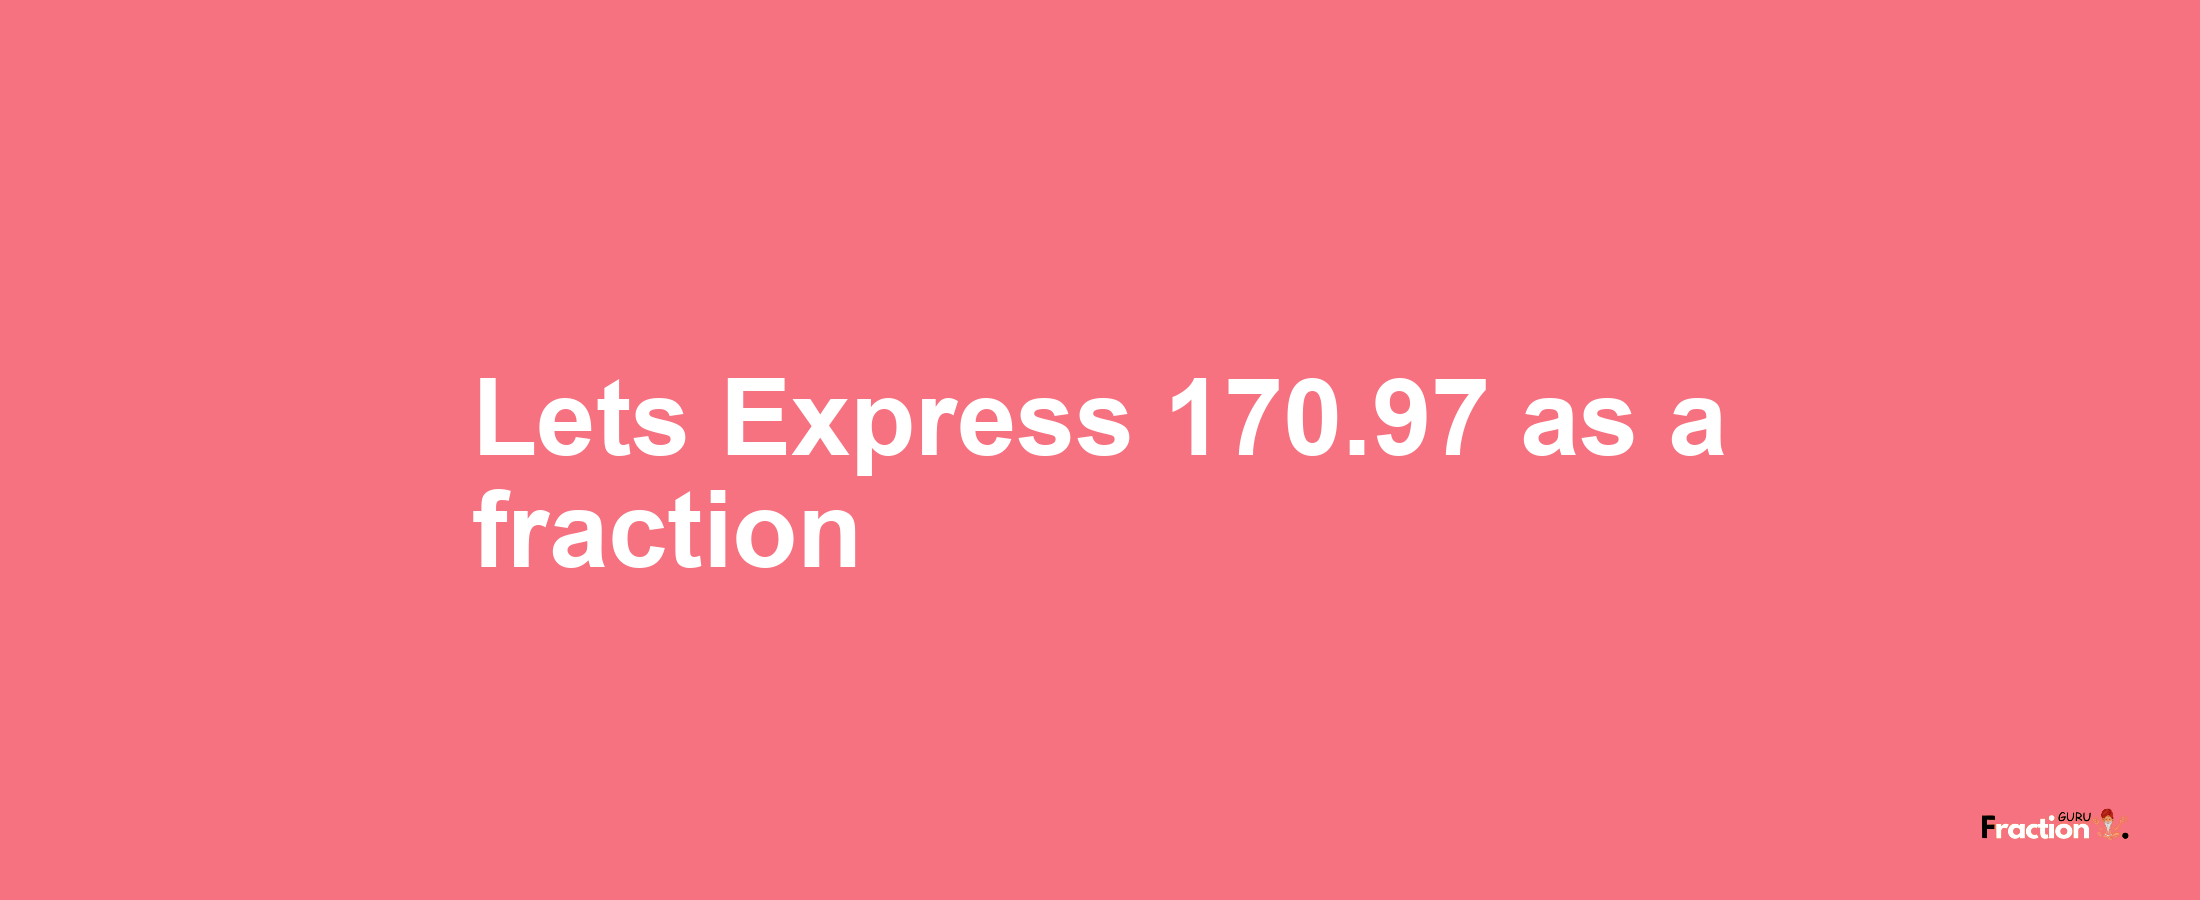 Lets Express 170.97 as afraction